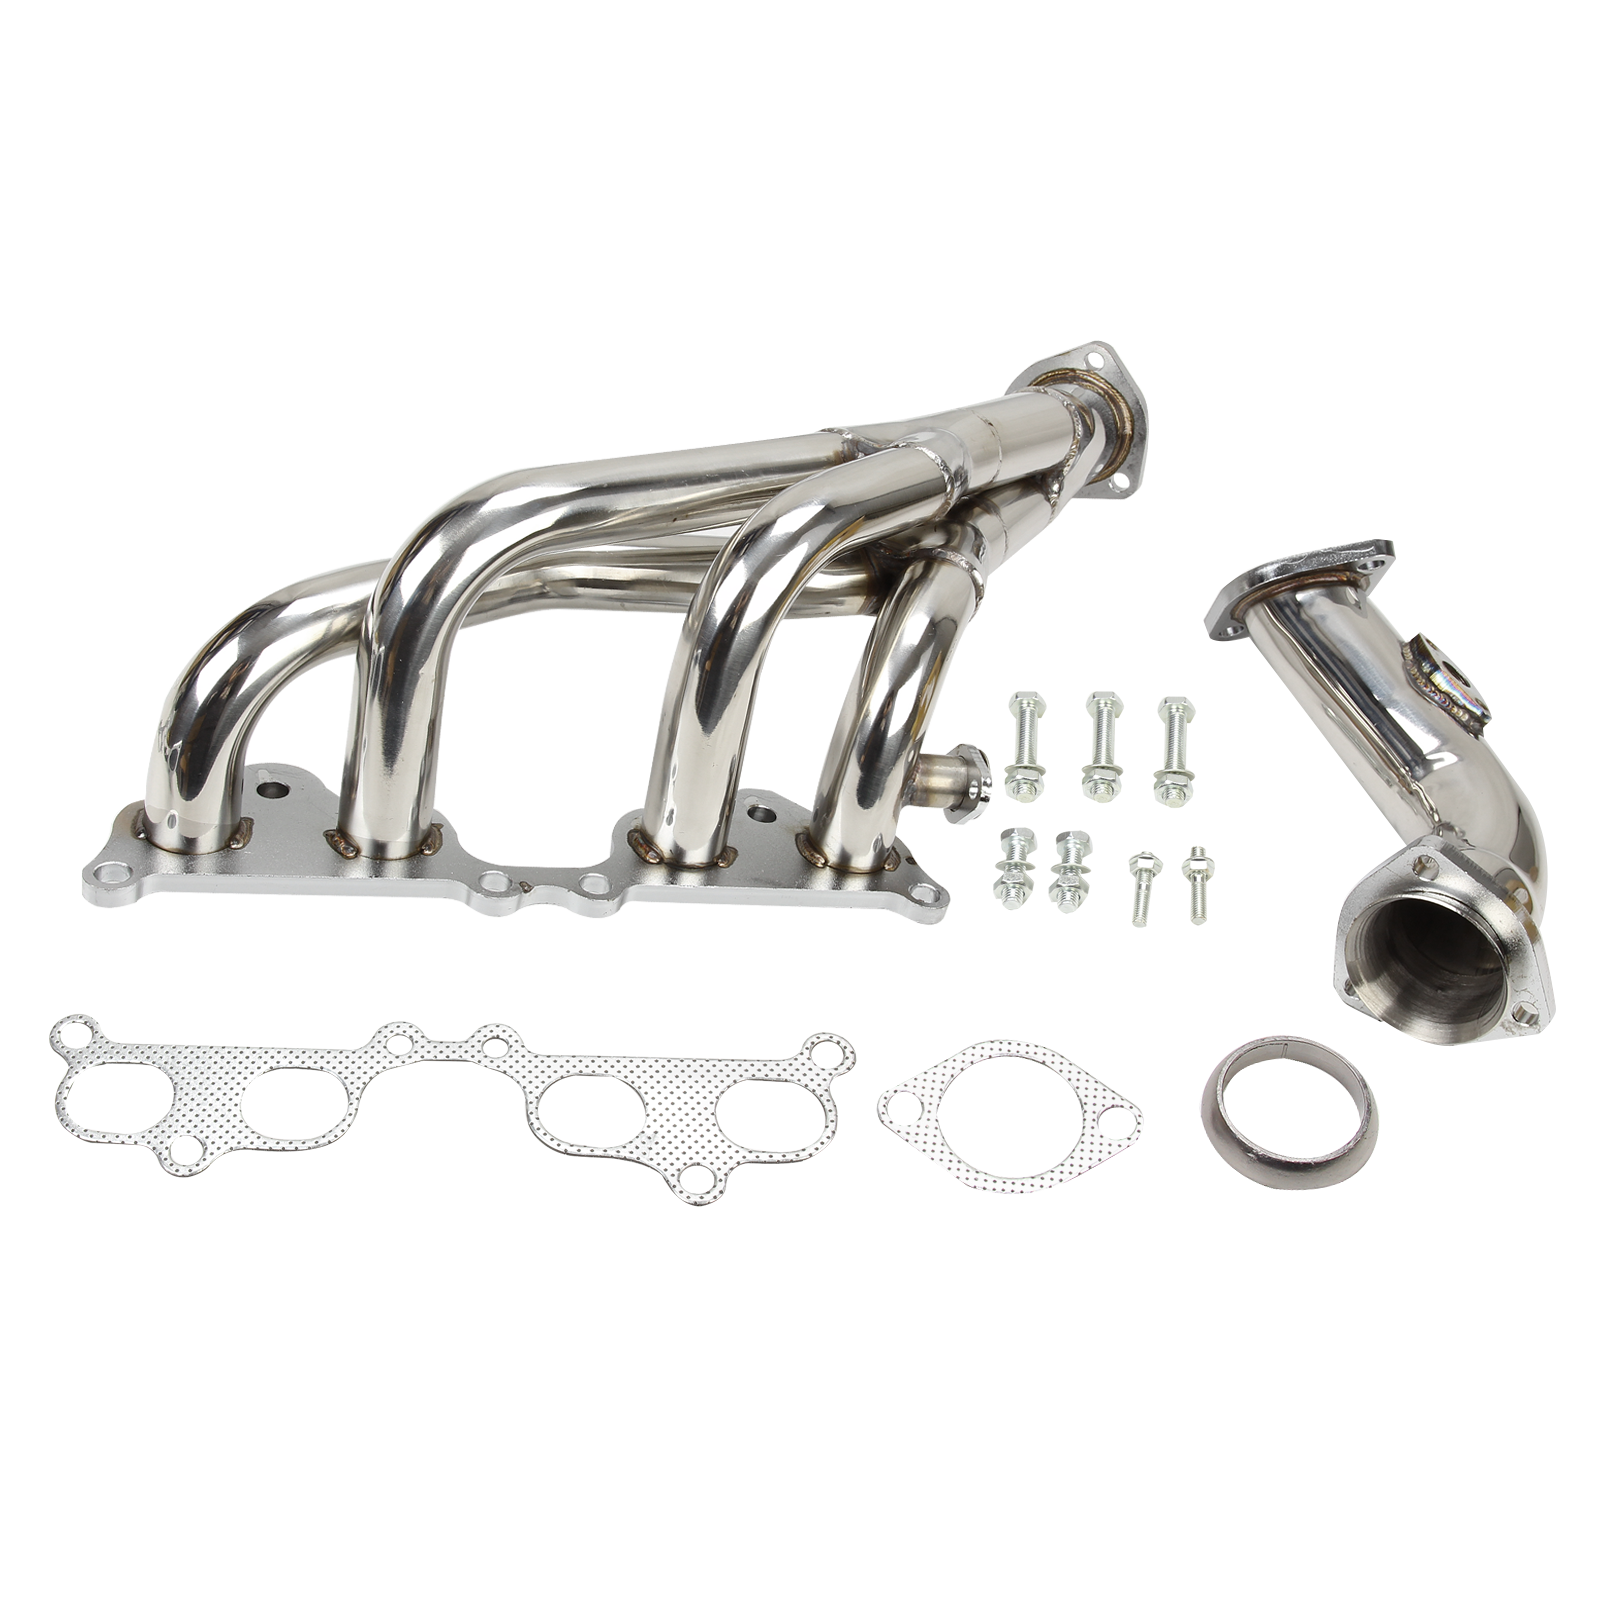 for-toyota-tacoma-95-01-2-4l-2-7l-l4-tri-y-exhaust-manifold-performance-header